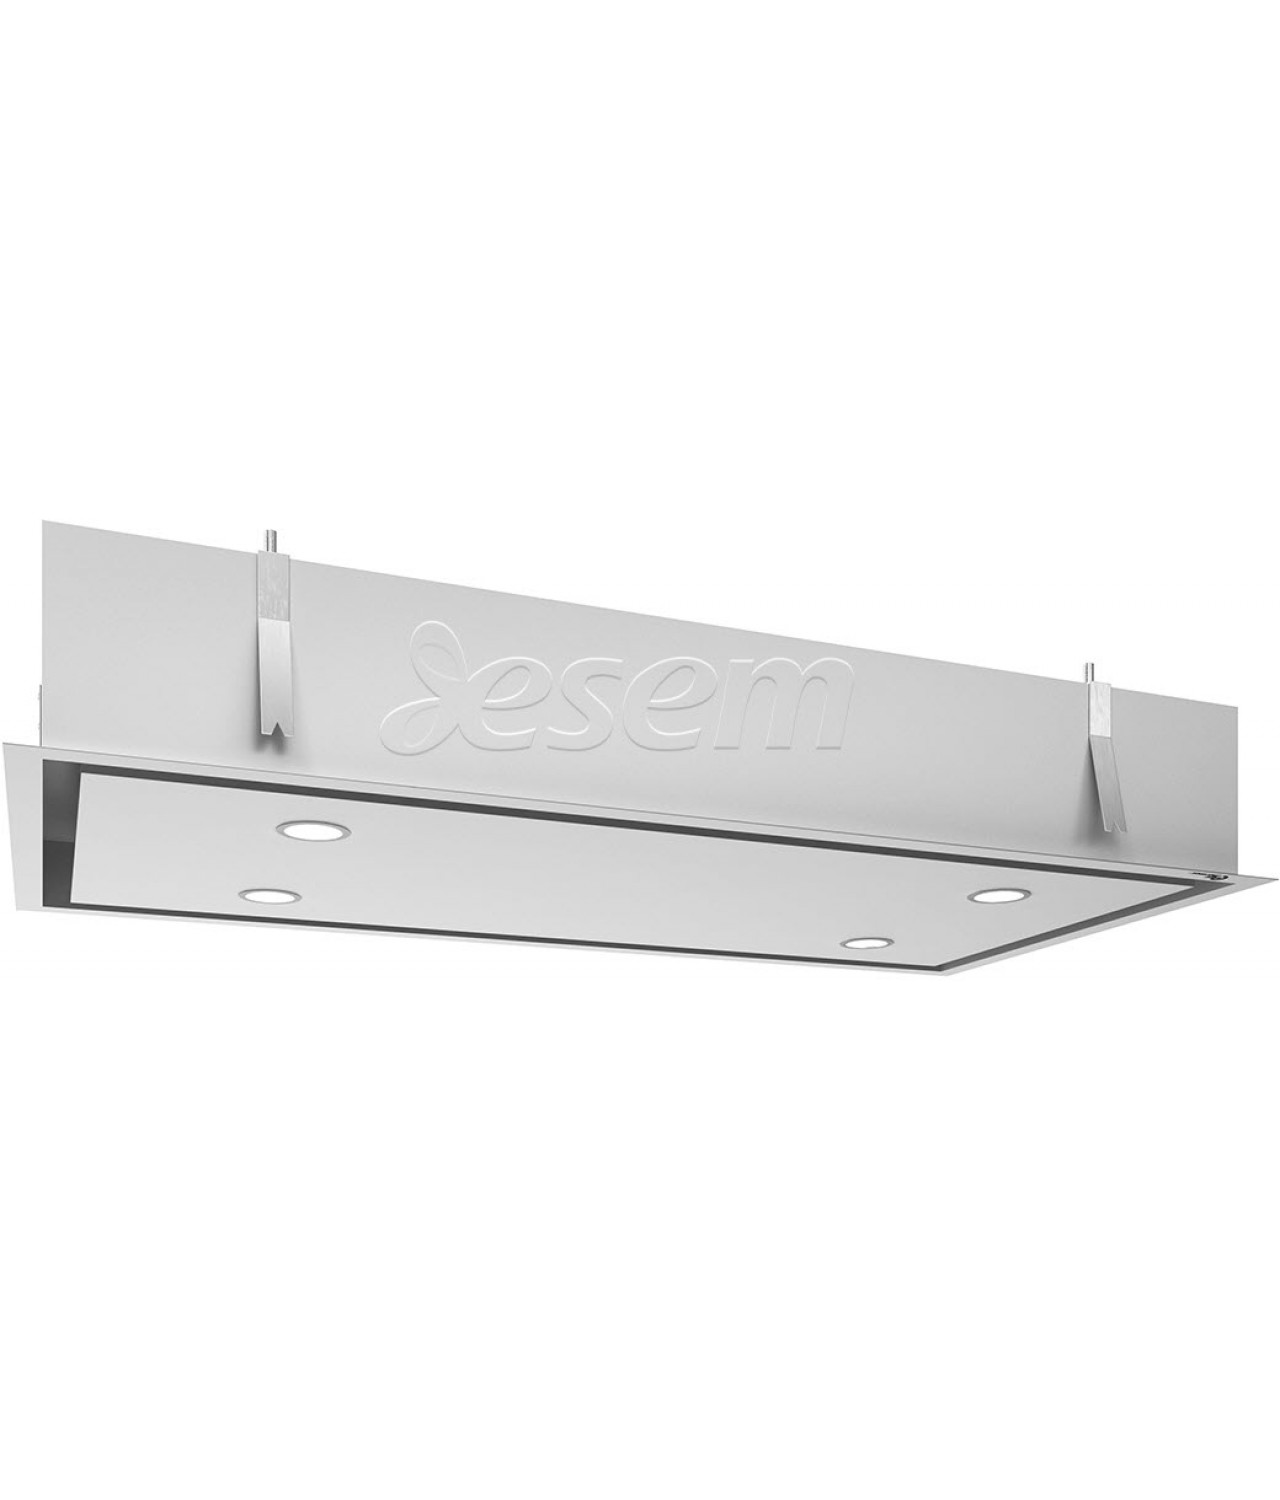 Ceiling integrated cooker hood Newcastle Maxi 1200 white